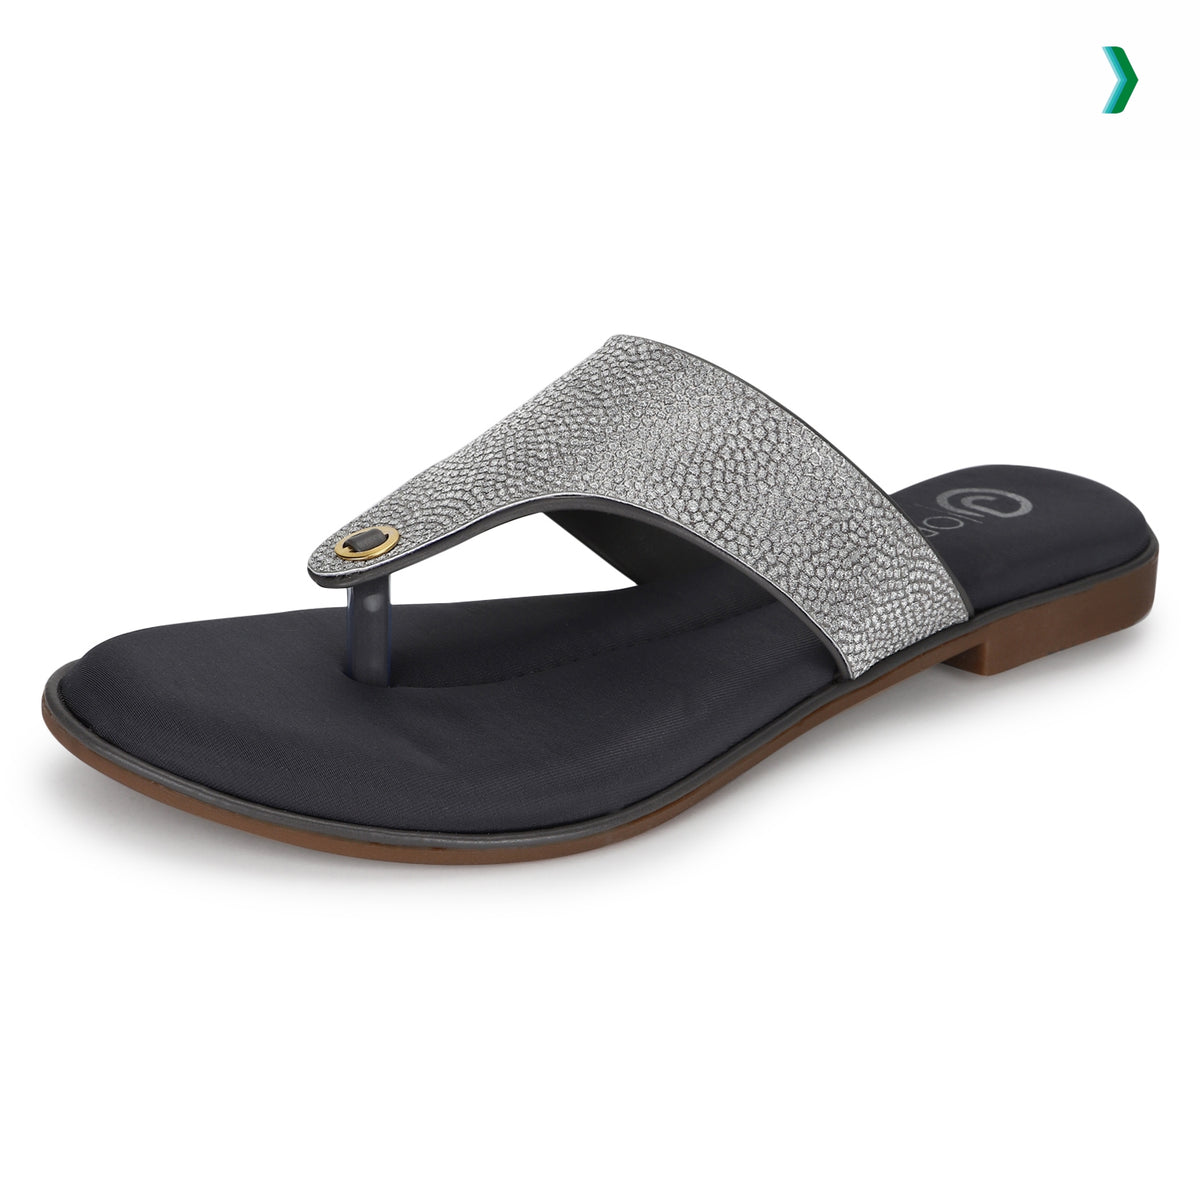 ortho joy slippers, dr ortho chappal for ladies, ortho soft slippers, orthopedic slipper, orthopaedic slippers for ladies, dr ortho slippers for ladies near me